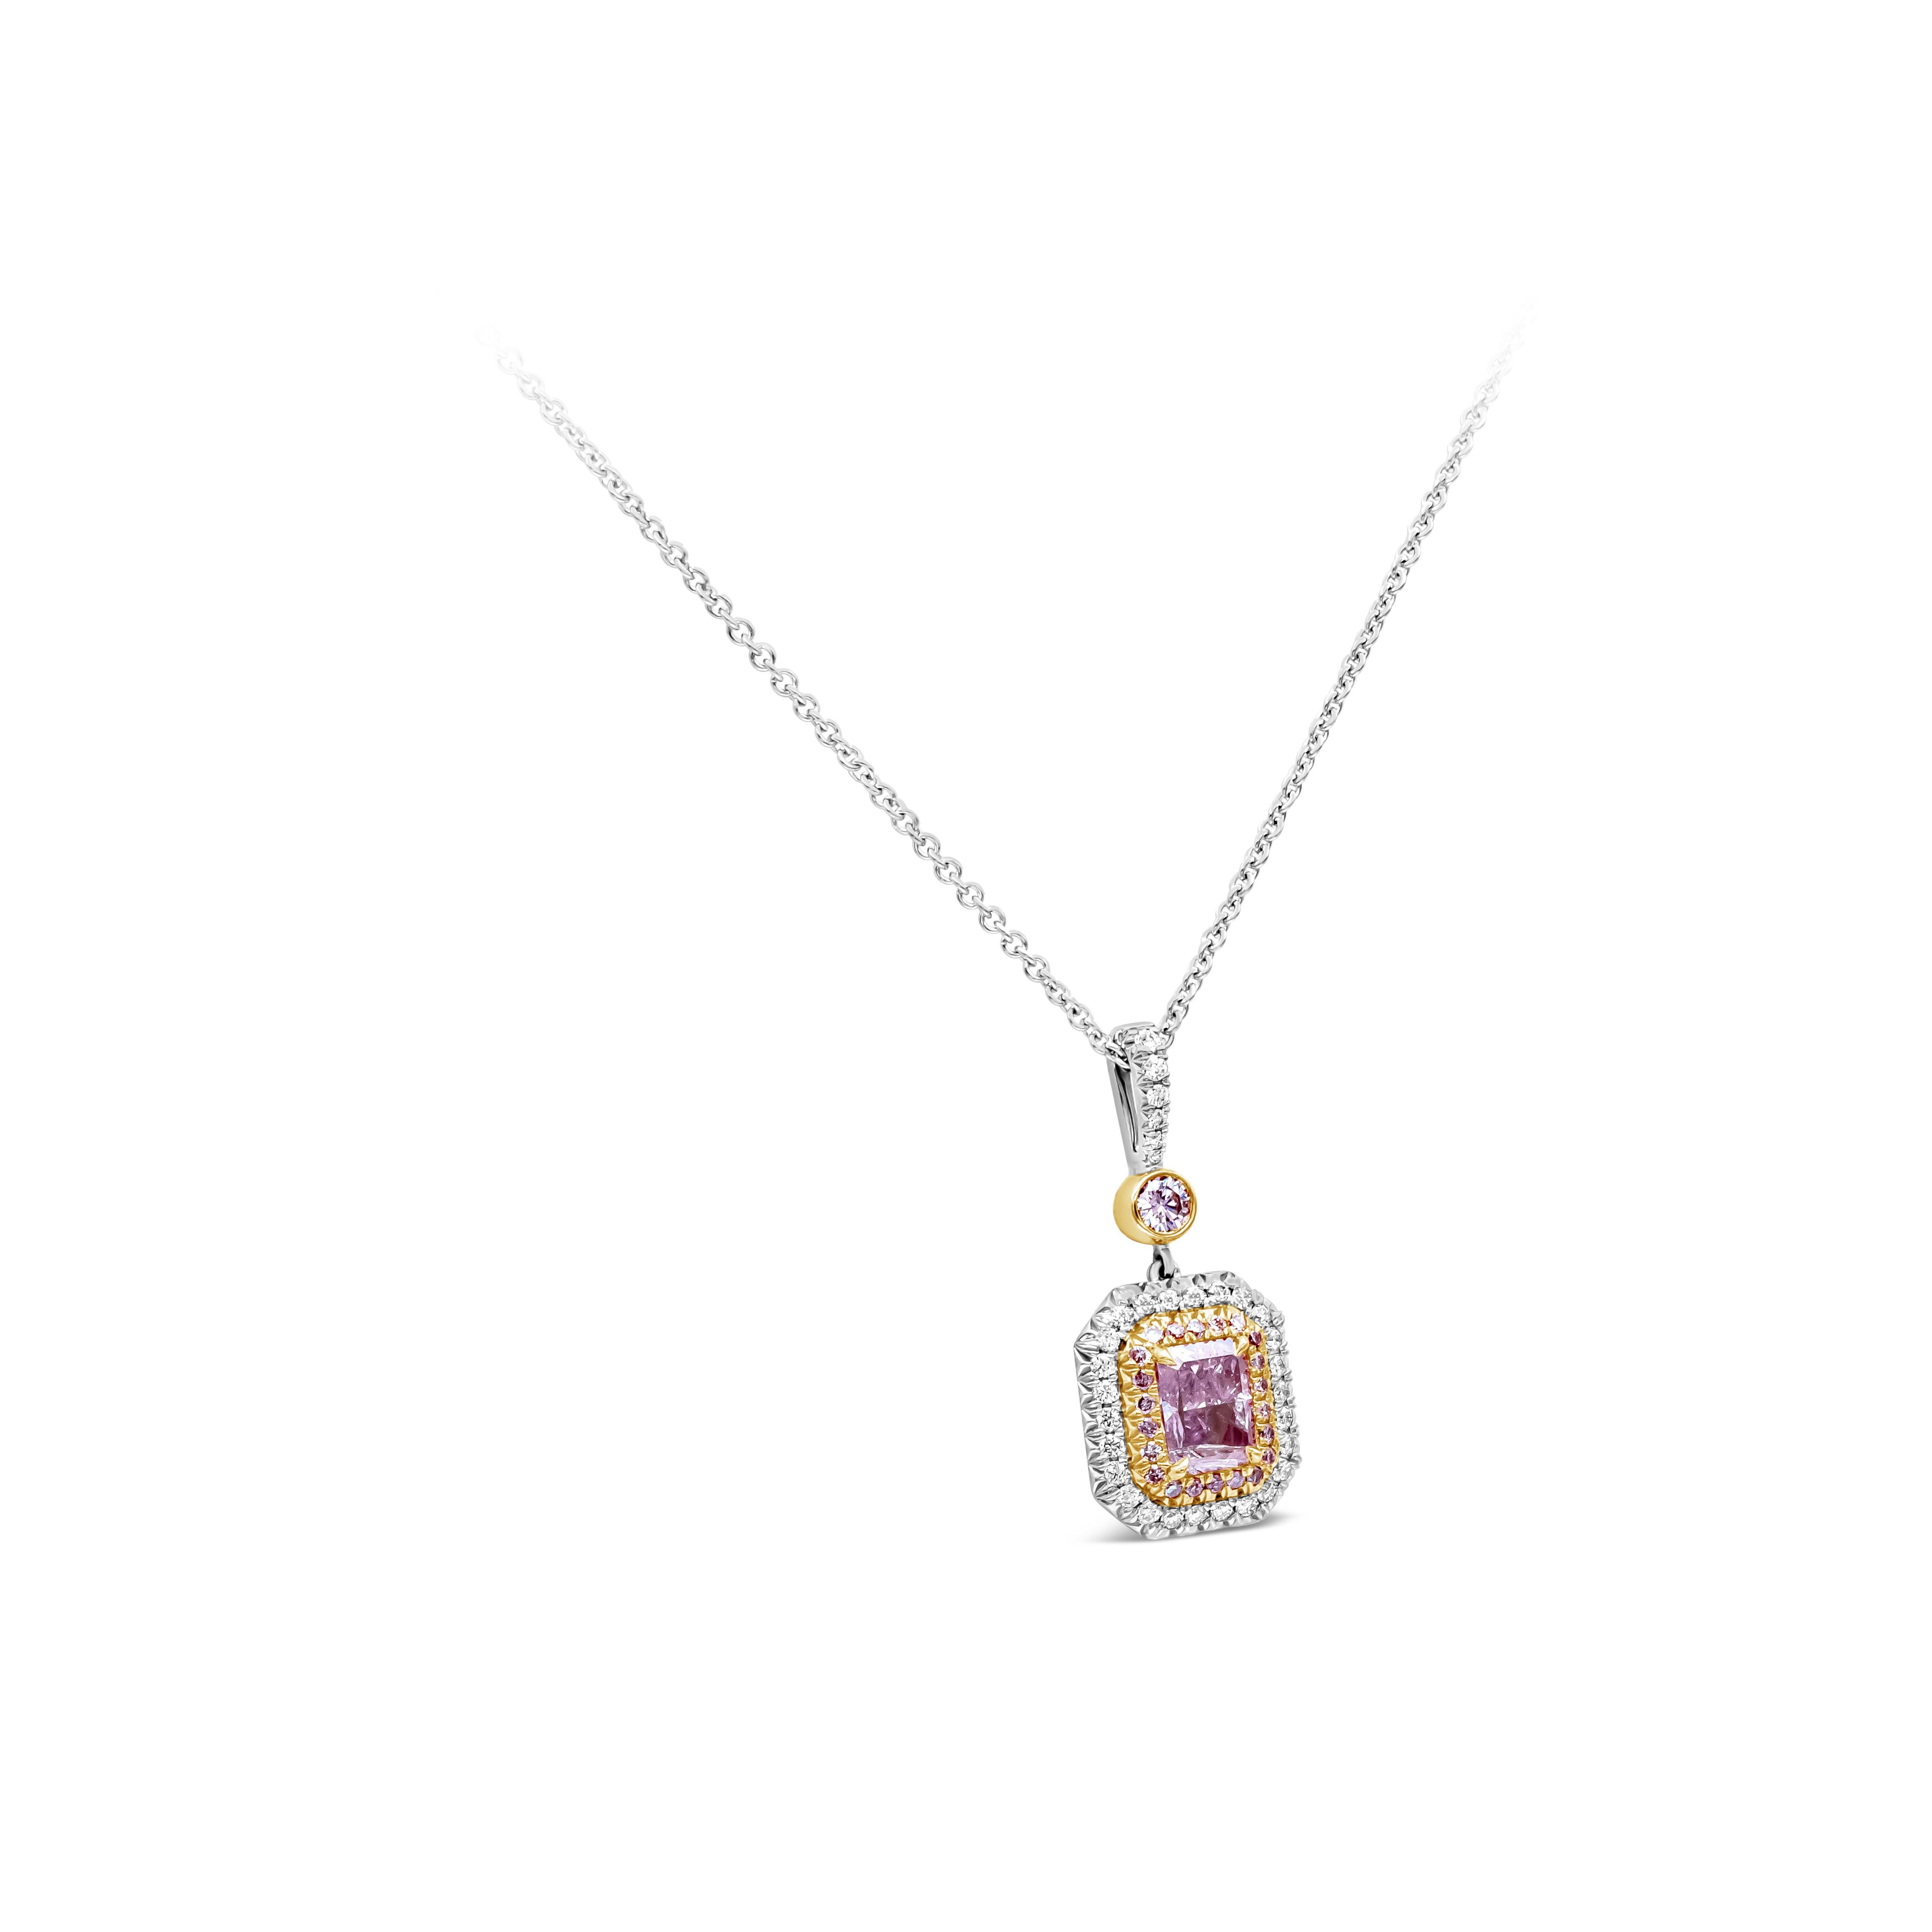 This beautiful pendant necklace showcasing a GIA Certified 1.01 carat radiant cut fancy purple pink diamond is surrounded by a double halo. The inner halo features 22 round pink diamonds weighing 0.11 carats. The outer halo features 32 brilliant